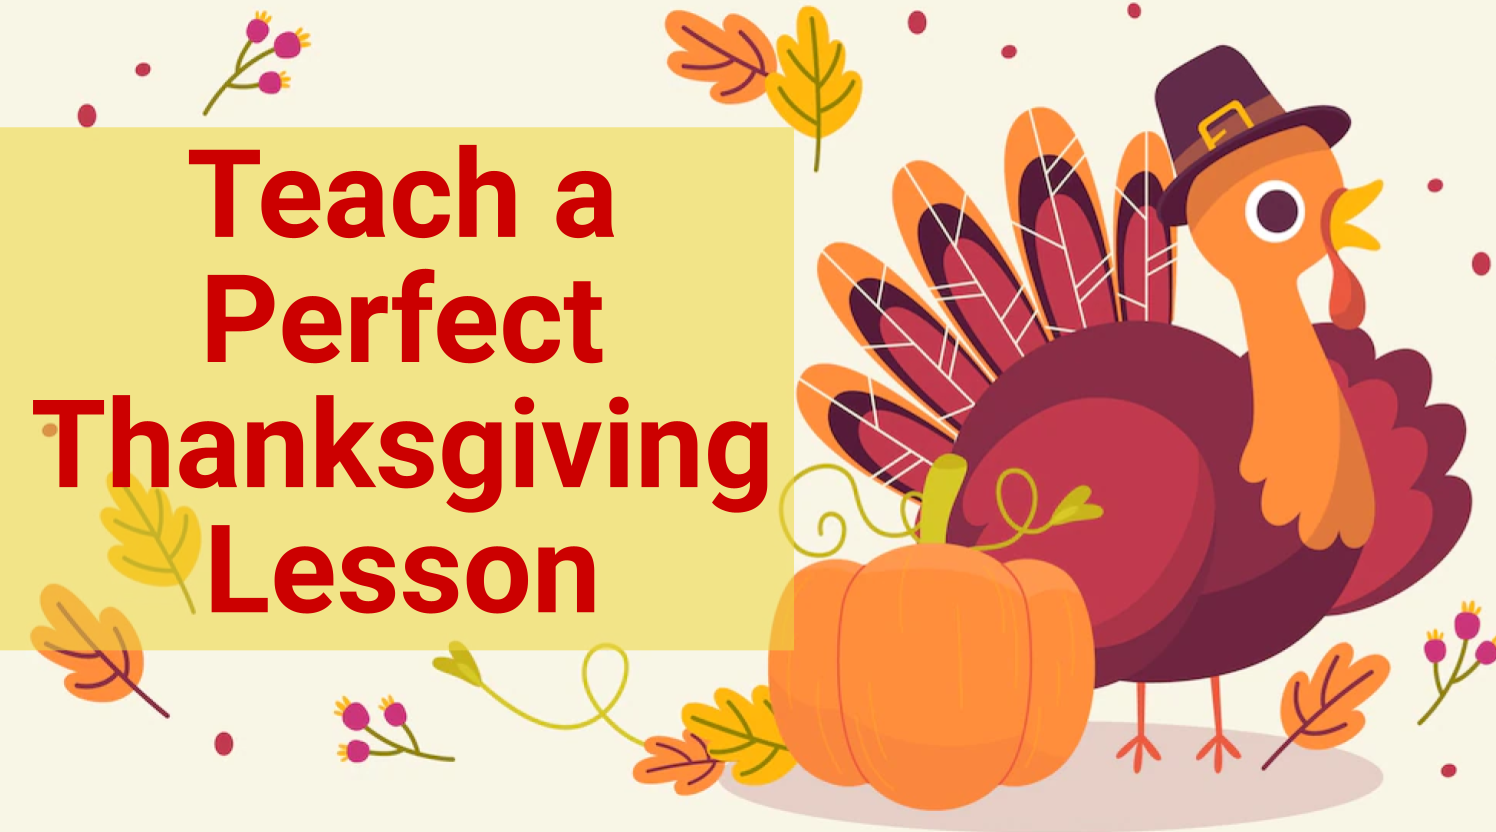 How to Teach a Perfect Thanksgiving Lesson